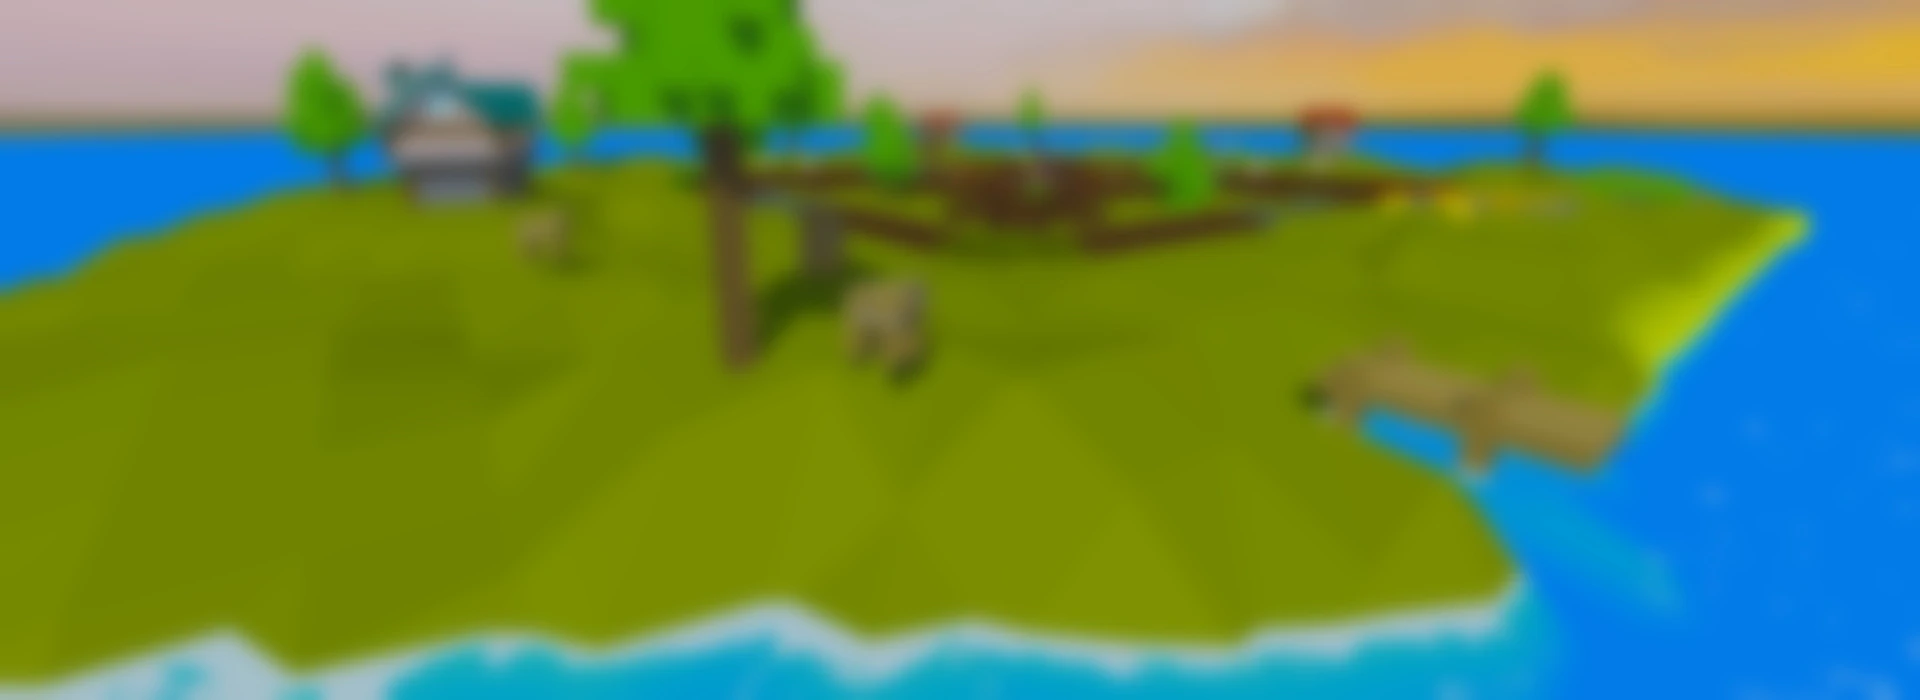 Blurred low poly island